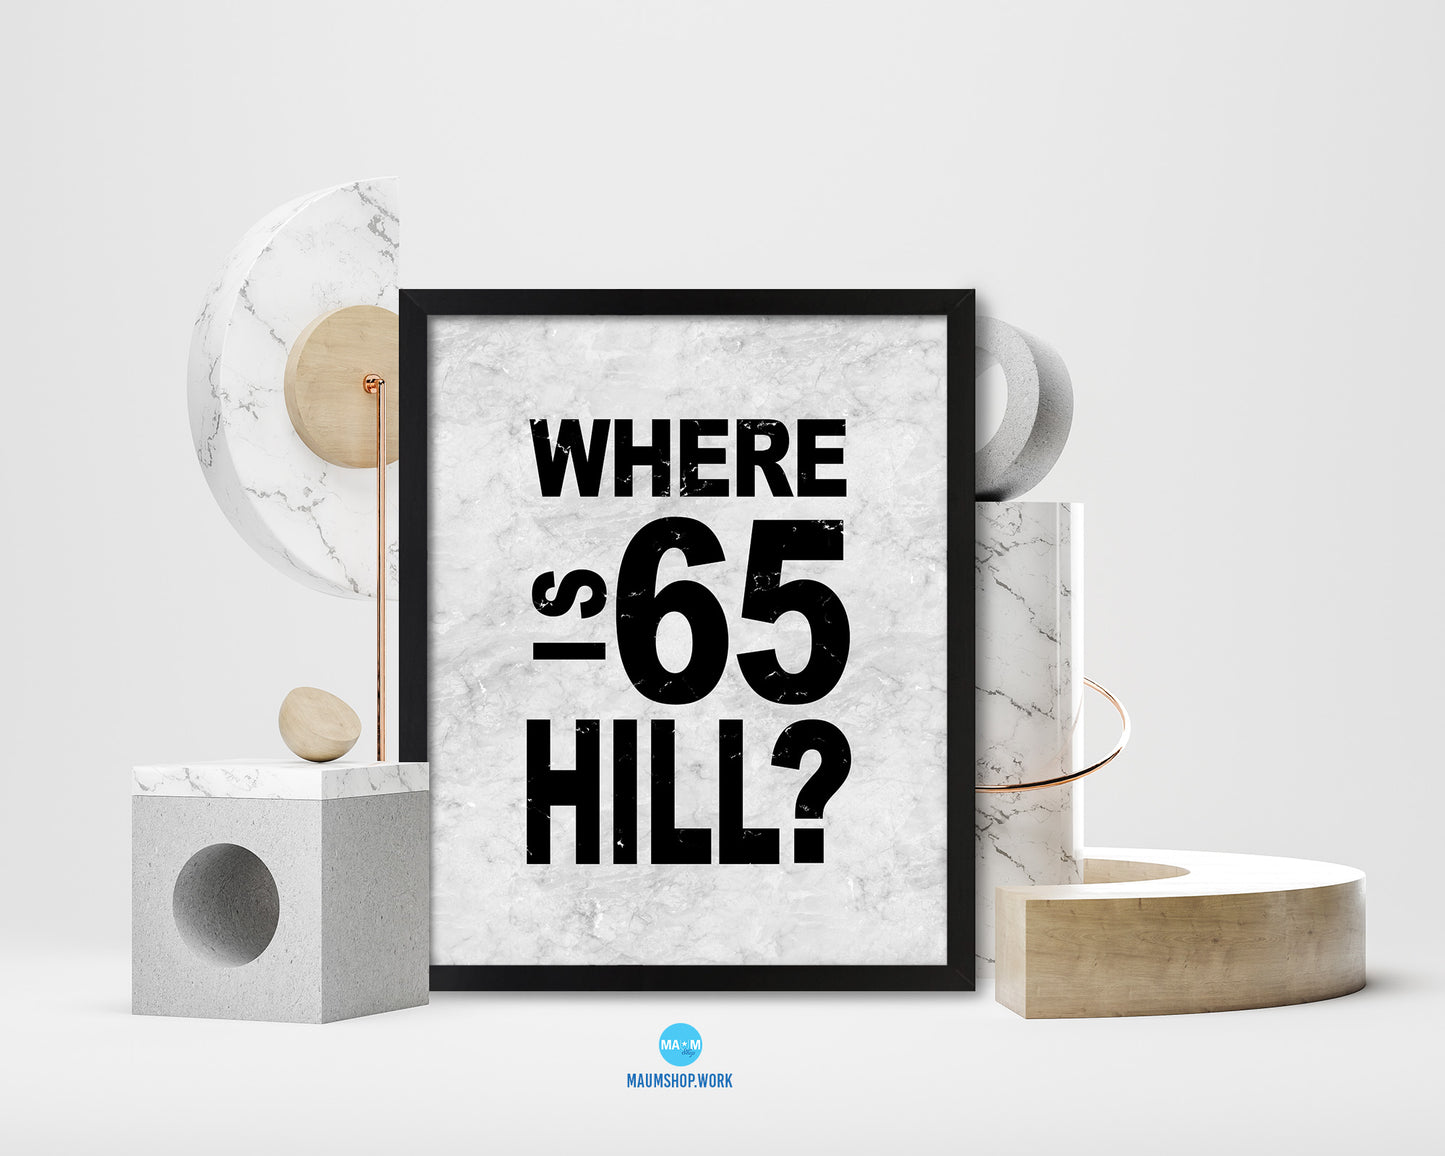 Where is 65 hill Quote Framed Print Wall Art Decor Gifts